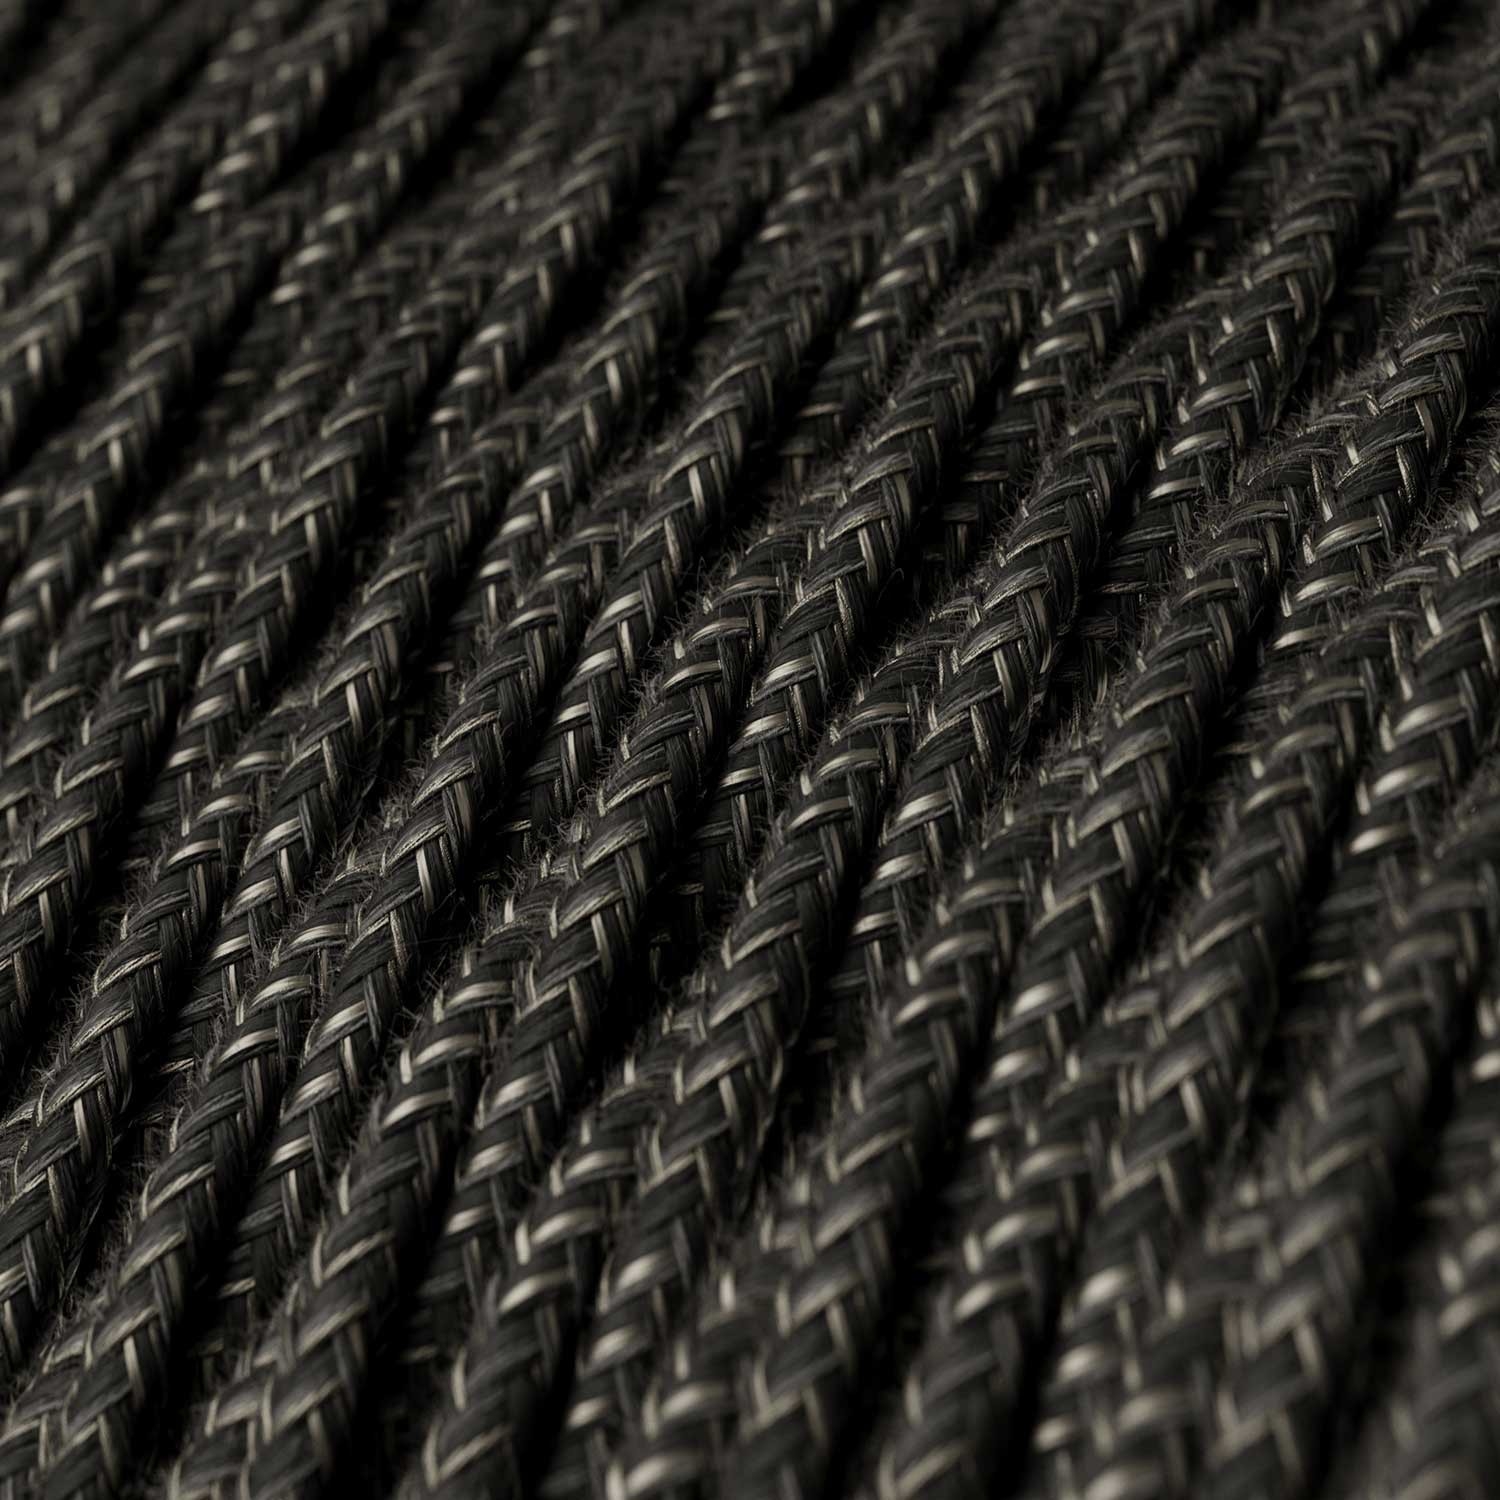 TN03 Natural Anthracite Twisted Linen Electrical Fabric Cloth Cord Cable